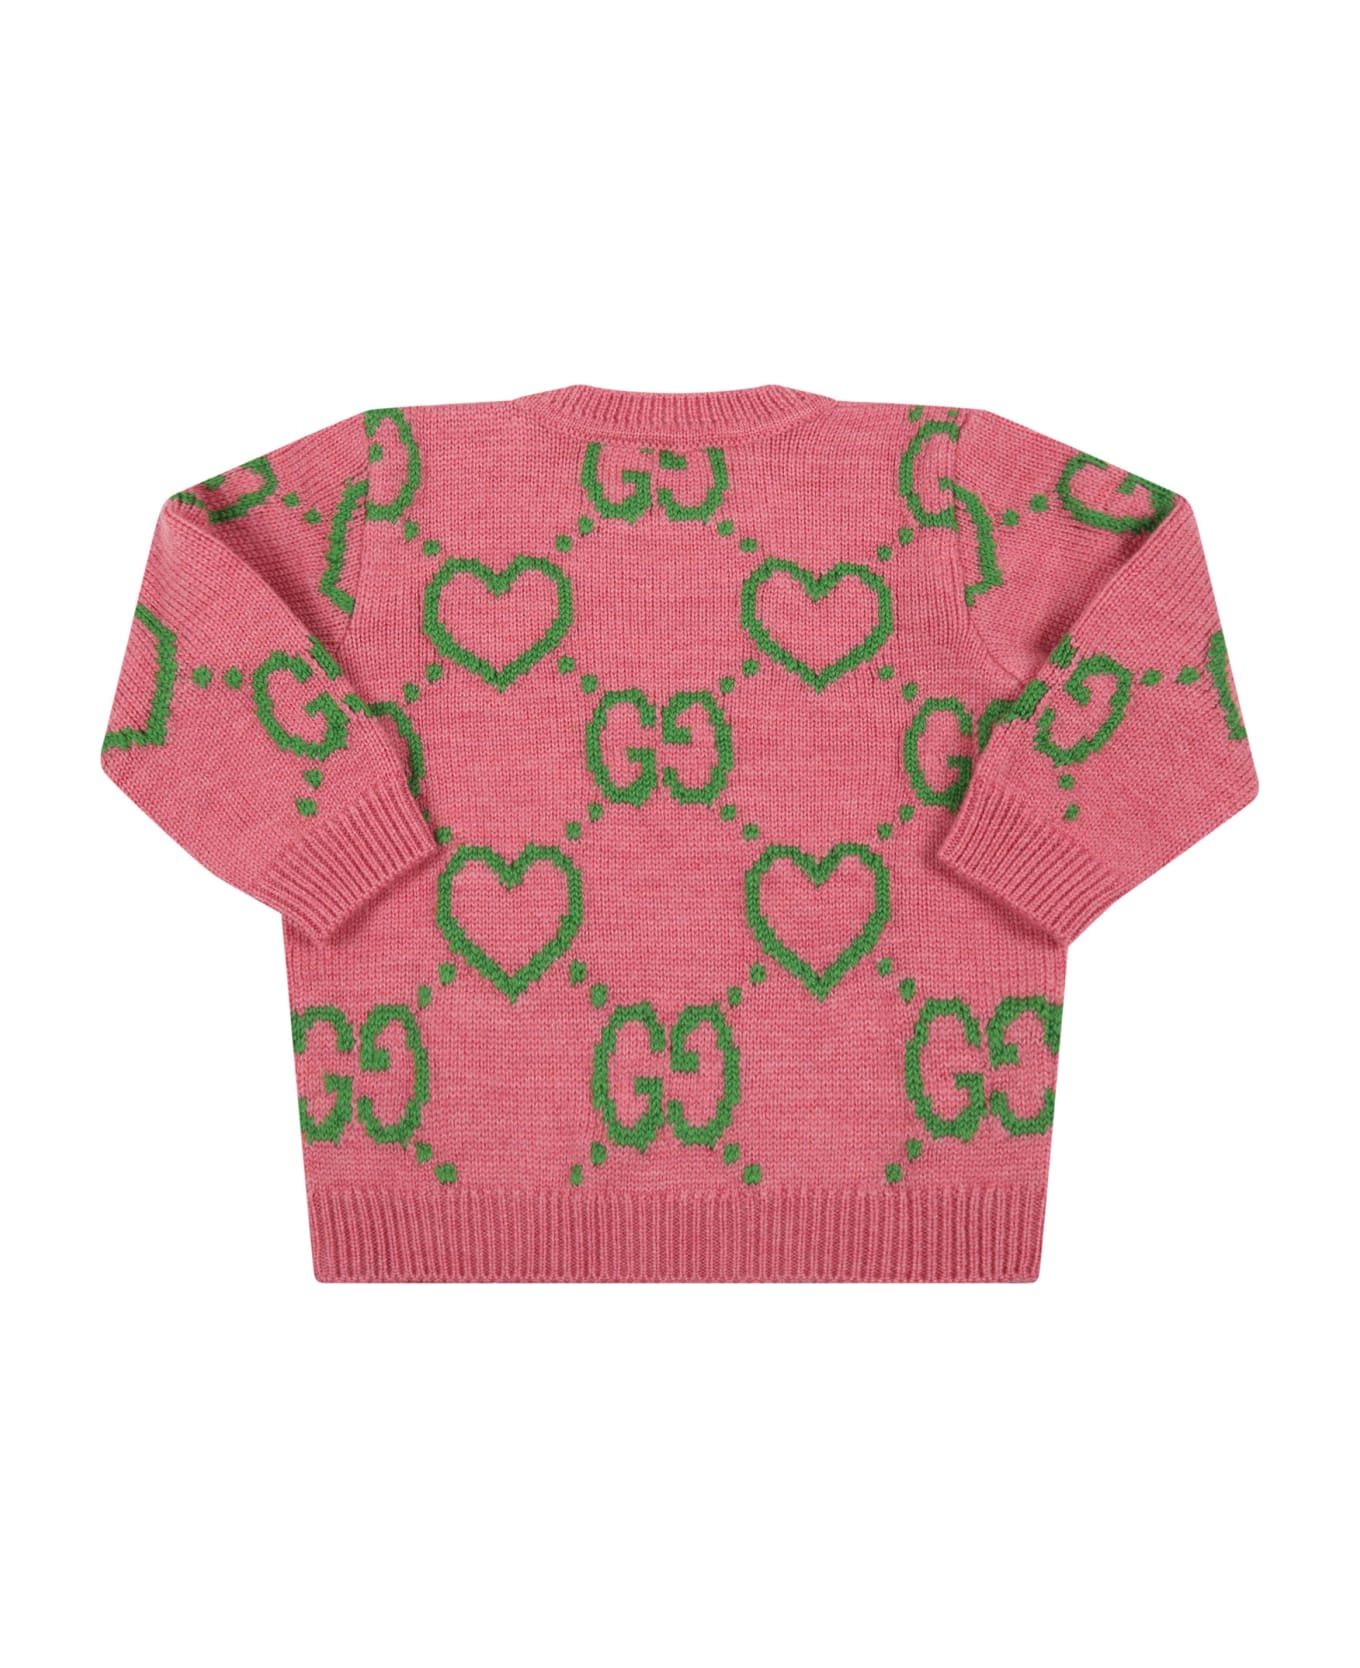 Gucci Pink Sweater For Baby Girl With Double Gg - Rose Grass Green